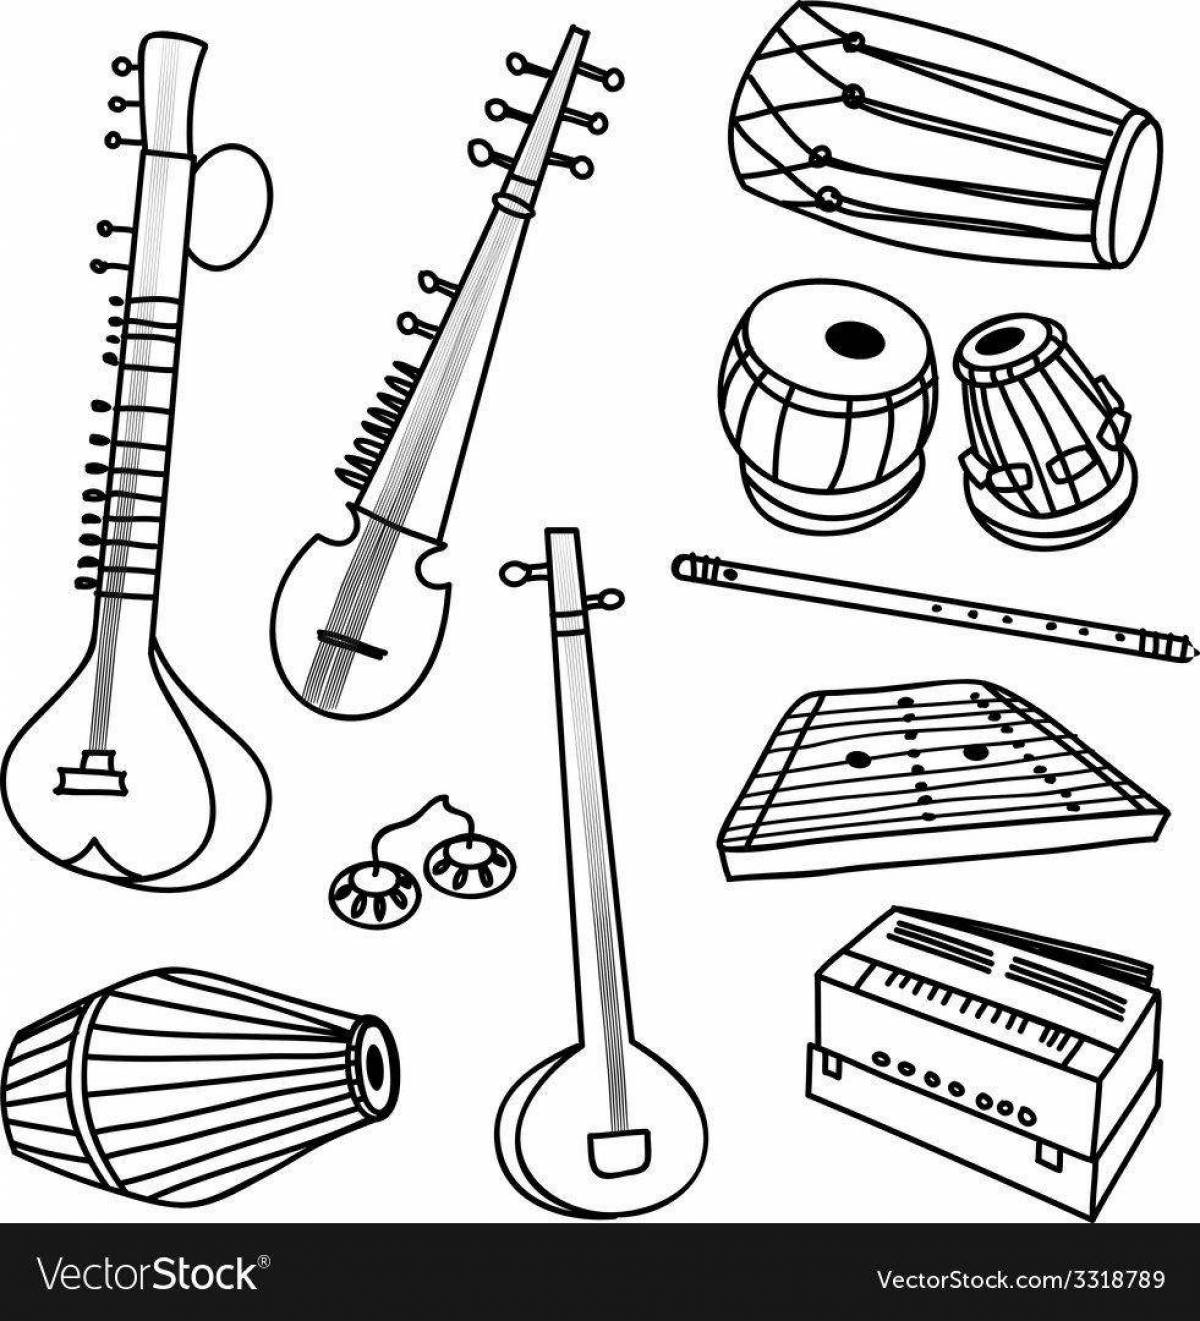 Shiny folk musical instruments coloring pages for kids